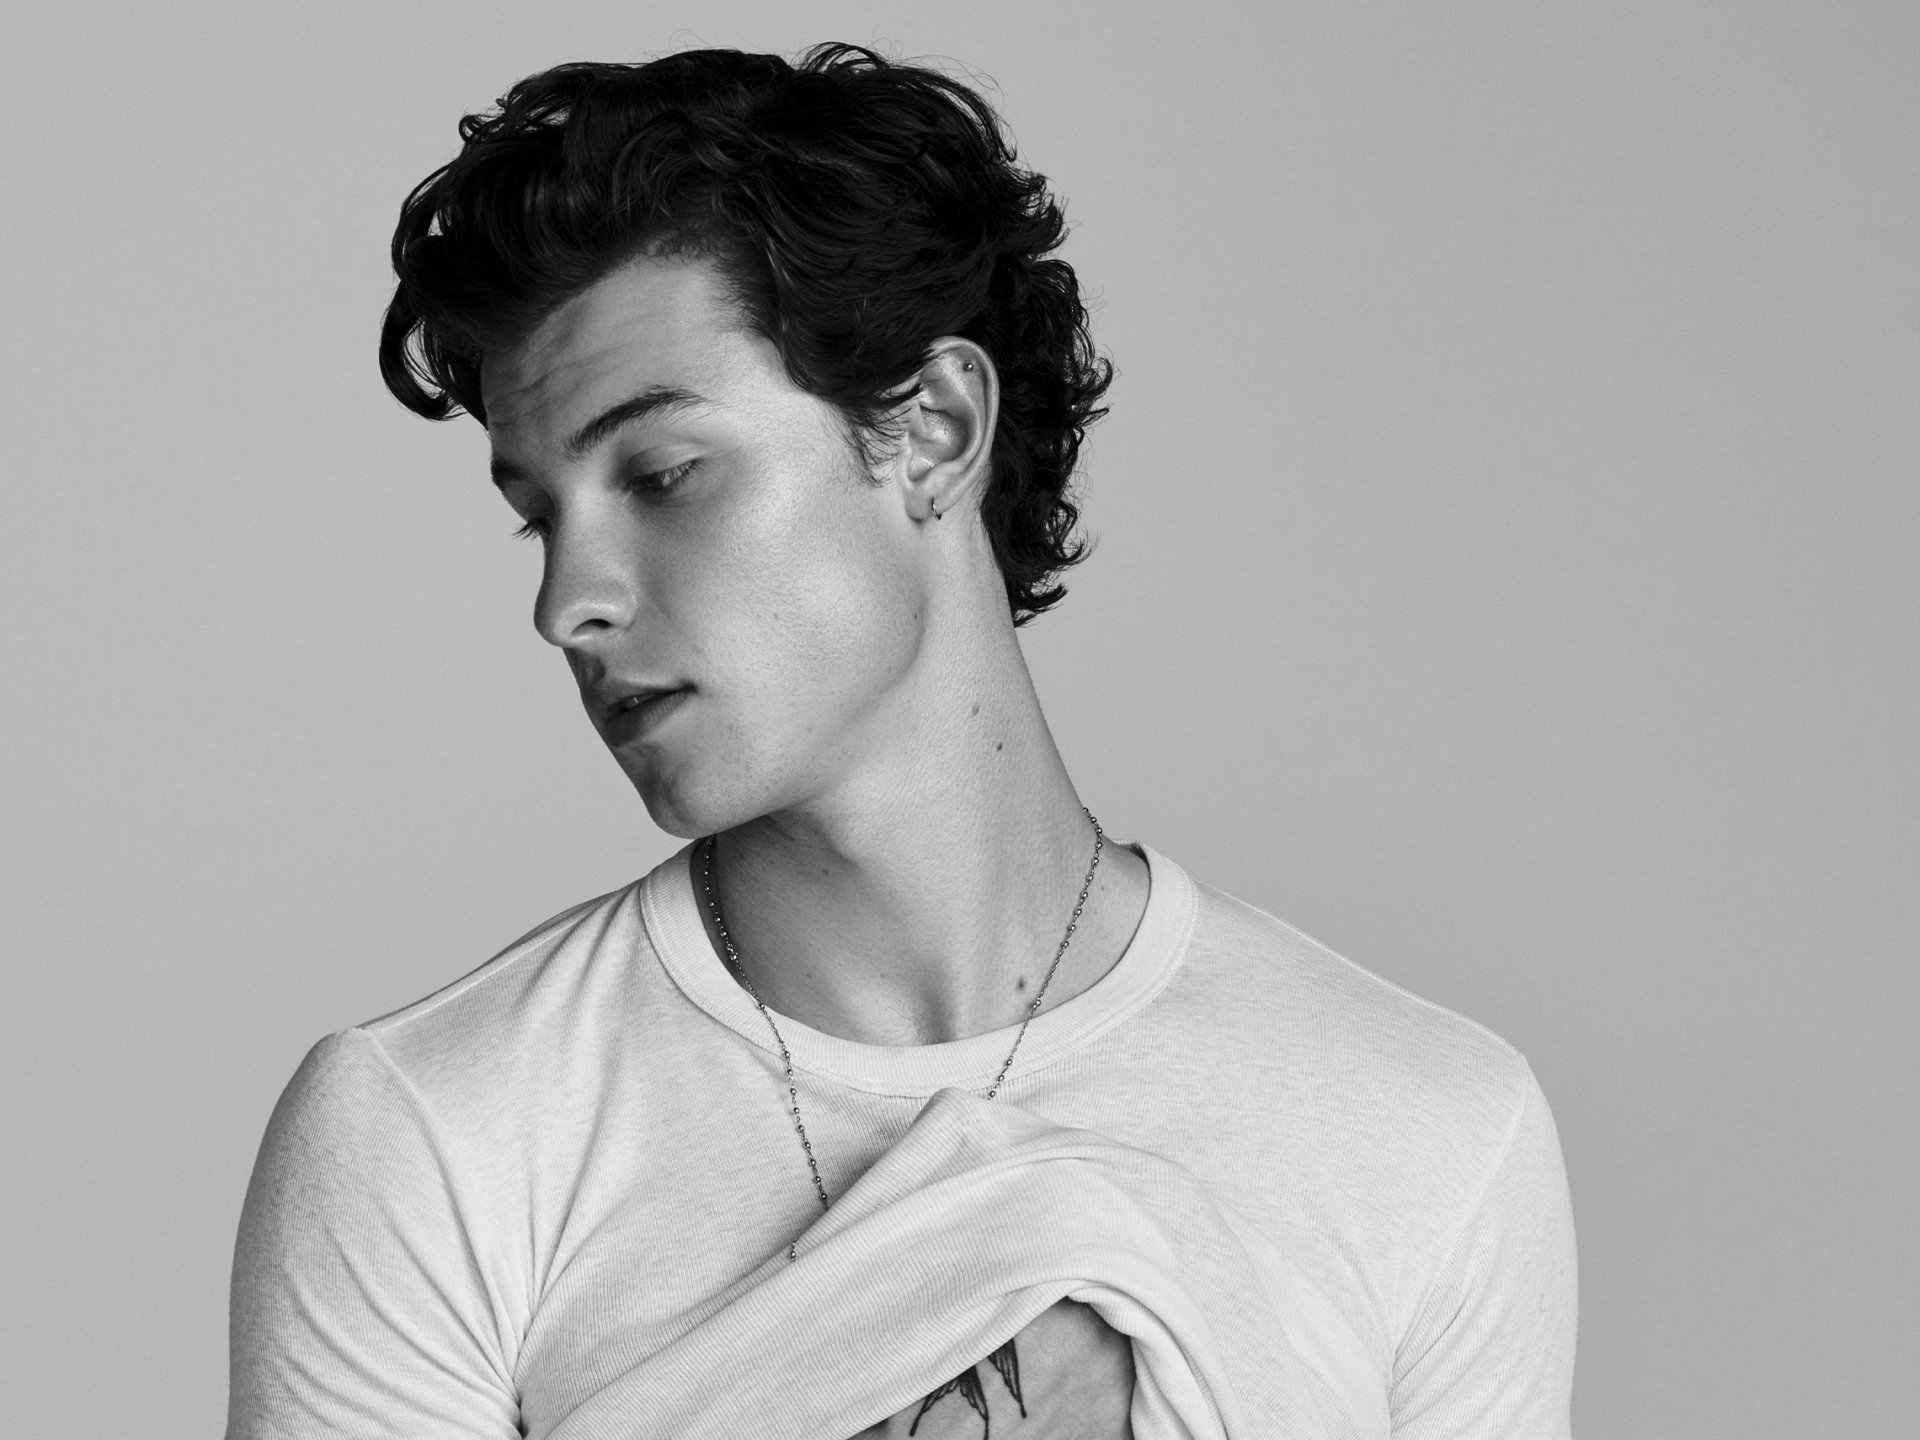 Shawn Mendes Wiki 2021: Net Worth, Height, Weight, Relationship & Full ...